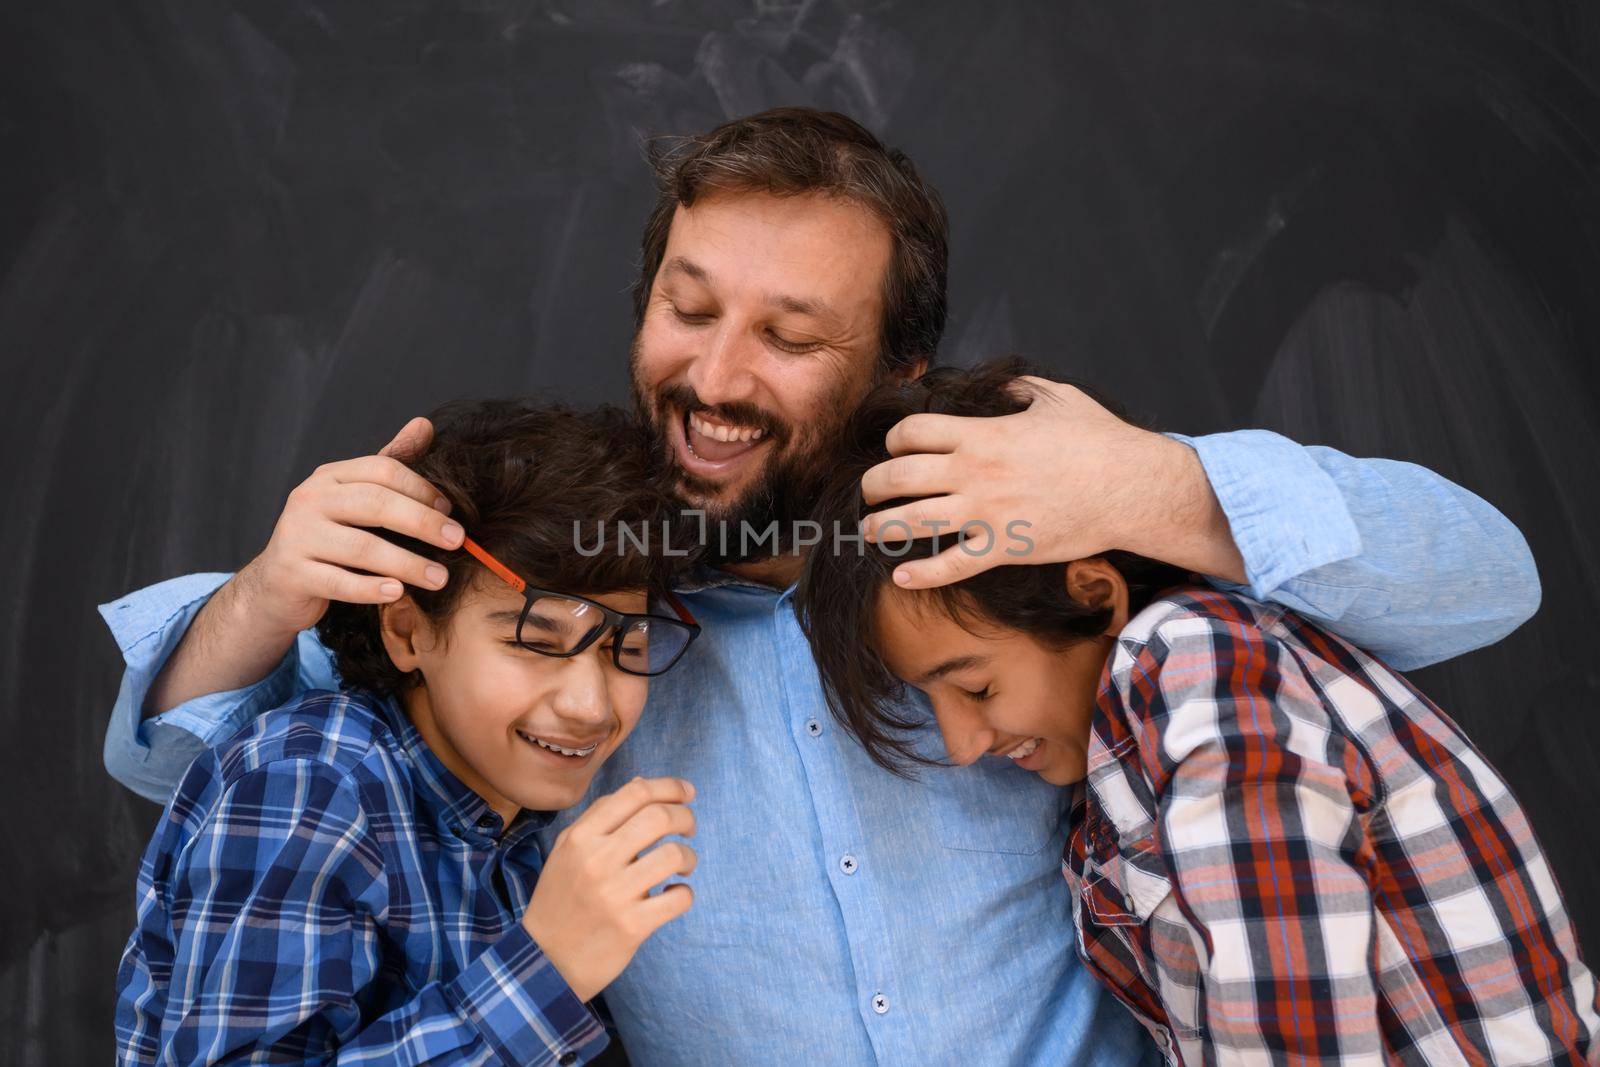 happy father hugging sons unforgettable moments of family joy in mixed race middle eastern Arab family. High quality photo